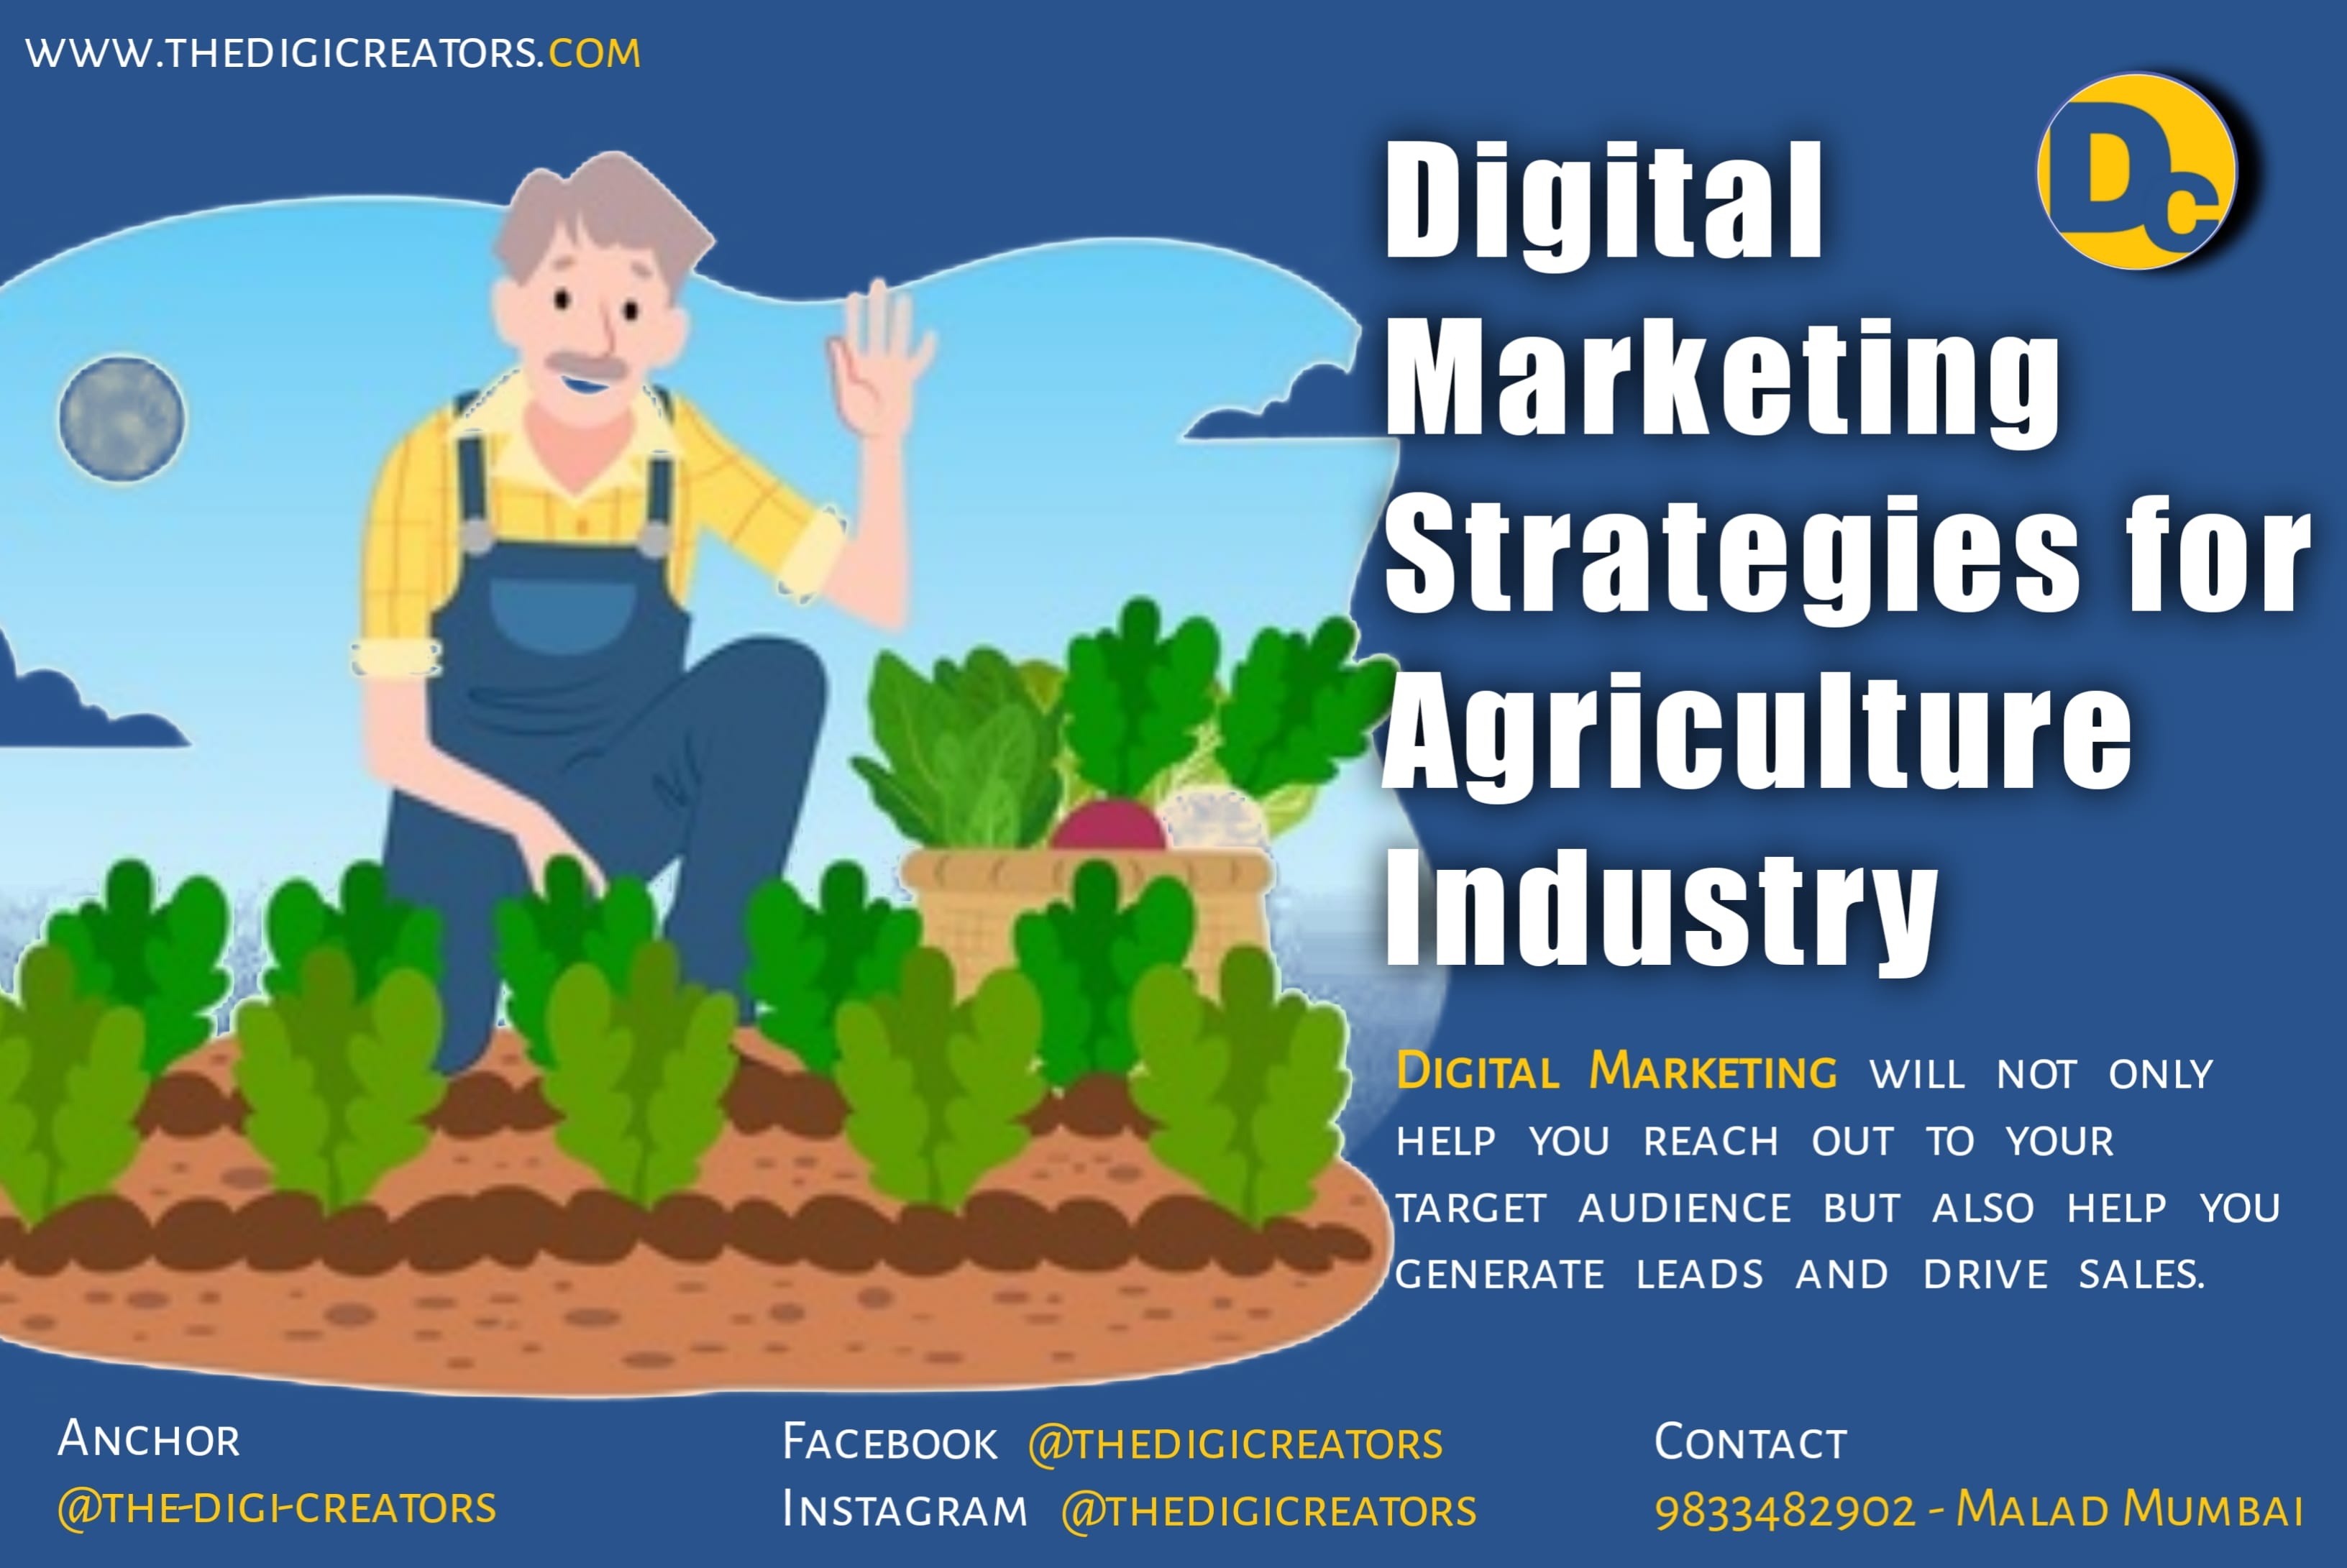 Top 4 Digital Marketing strategies for agriculture industry